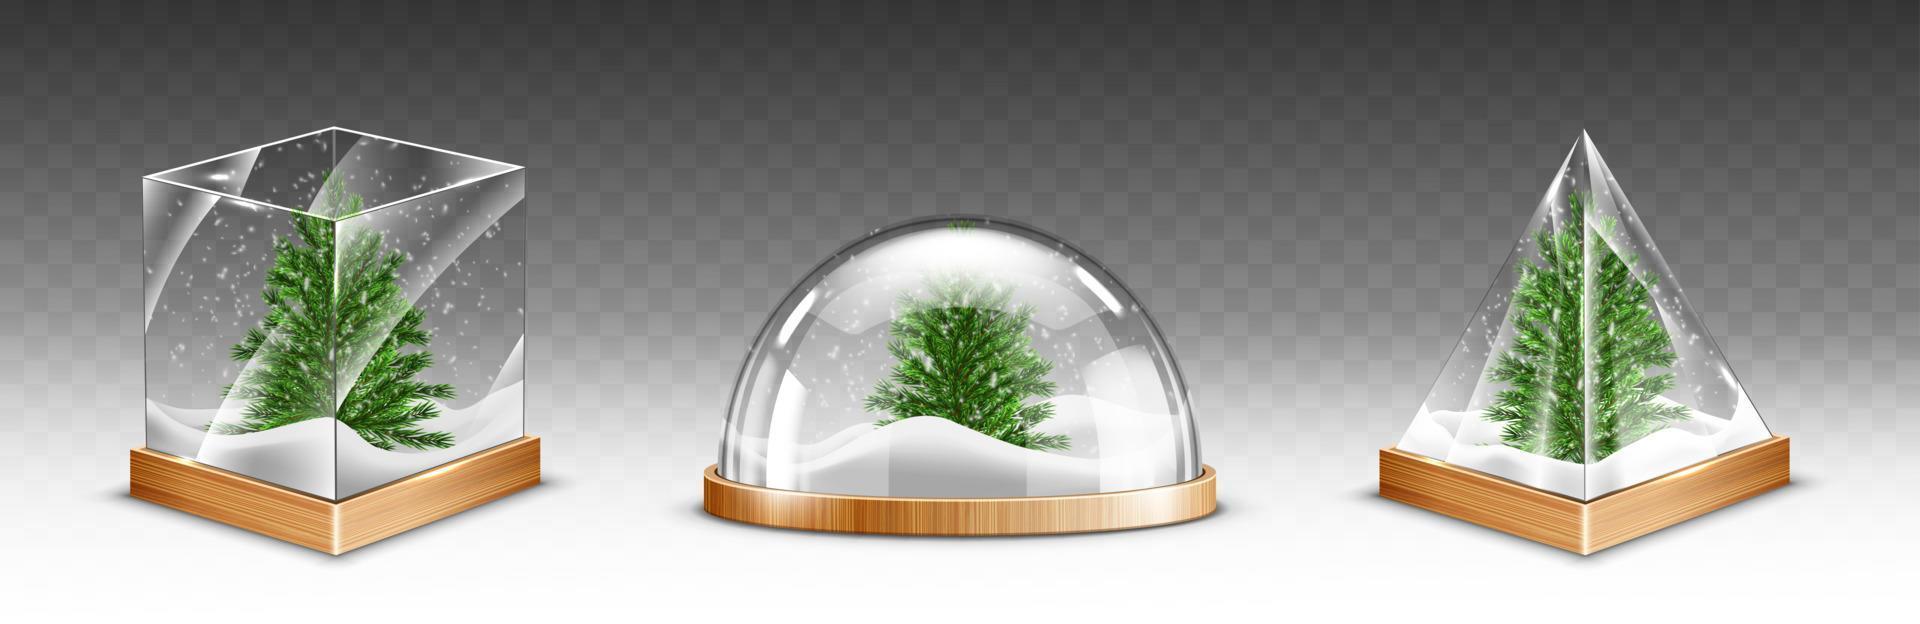 Snow globes with christmas tree on wooden base vector